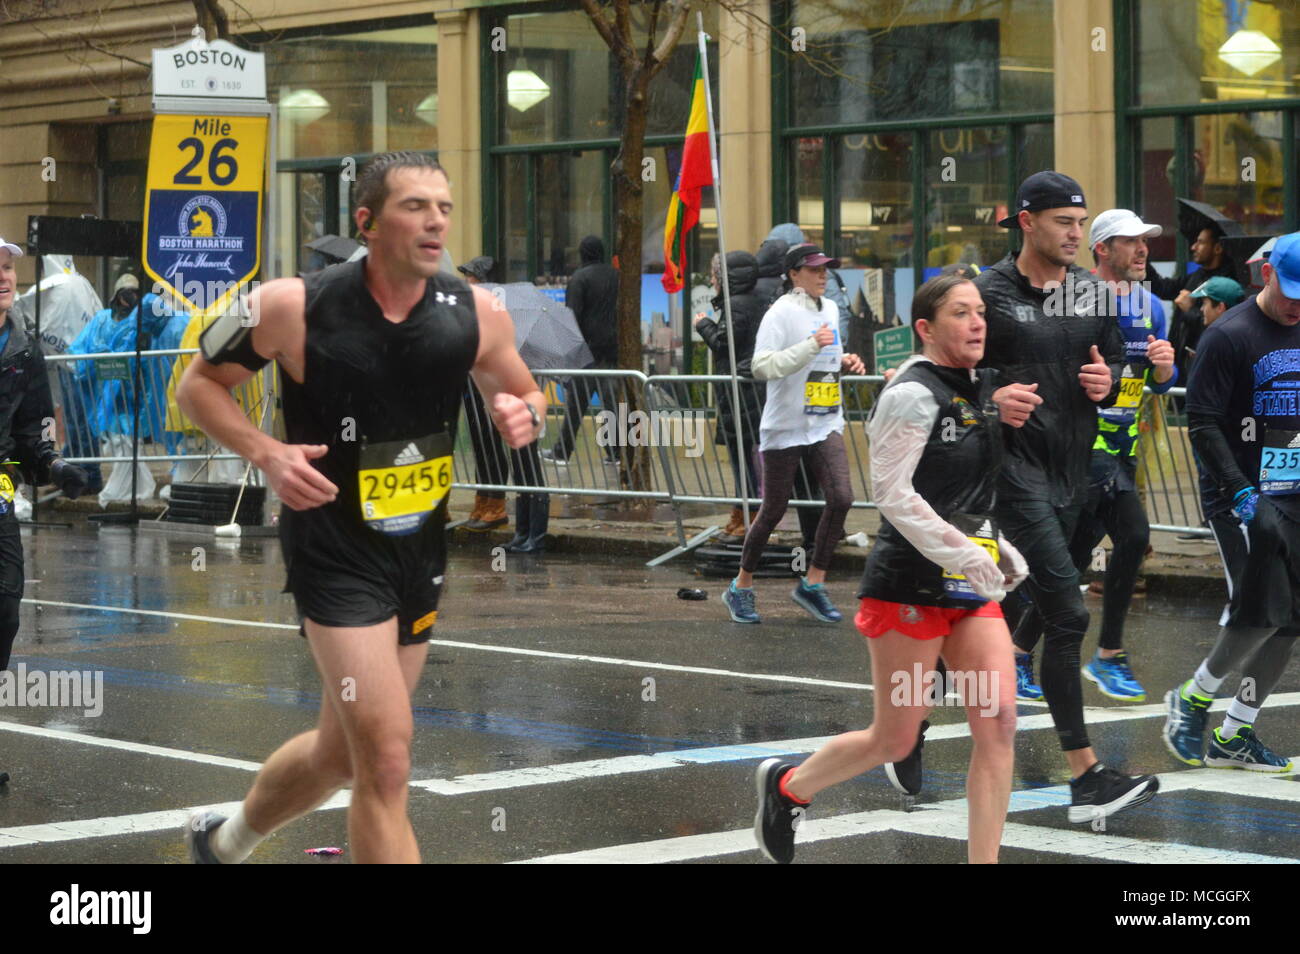 Boston, MA, USA April 16, 2018 Marathoin runners brave the cold, wind and rain as they approach the 26 mile marker in the Boston Marathon Credit: James Kirkikis/Alamy Live News Stock Photo